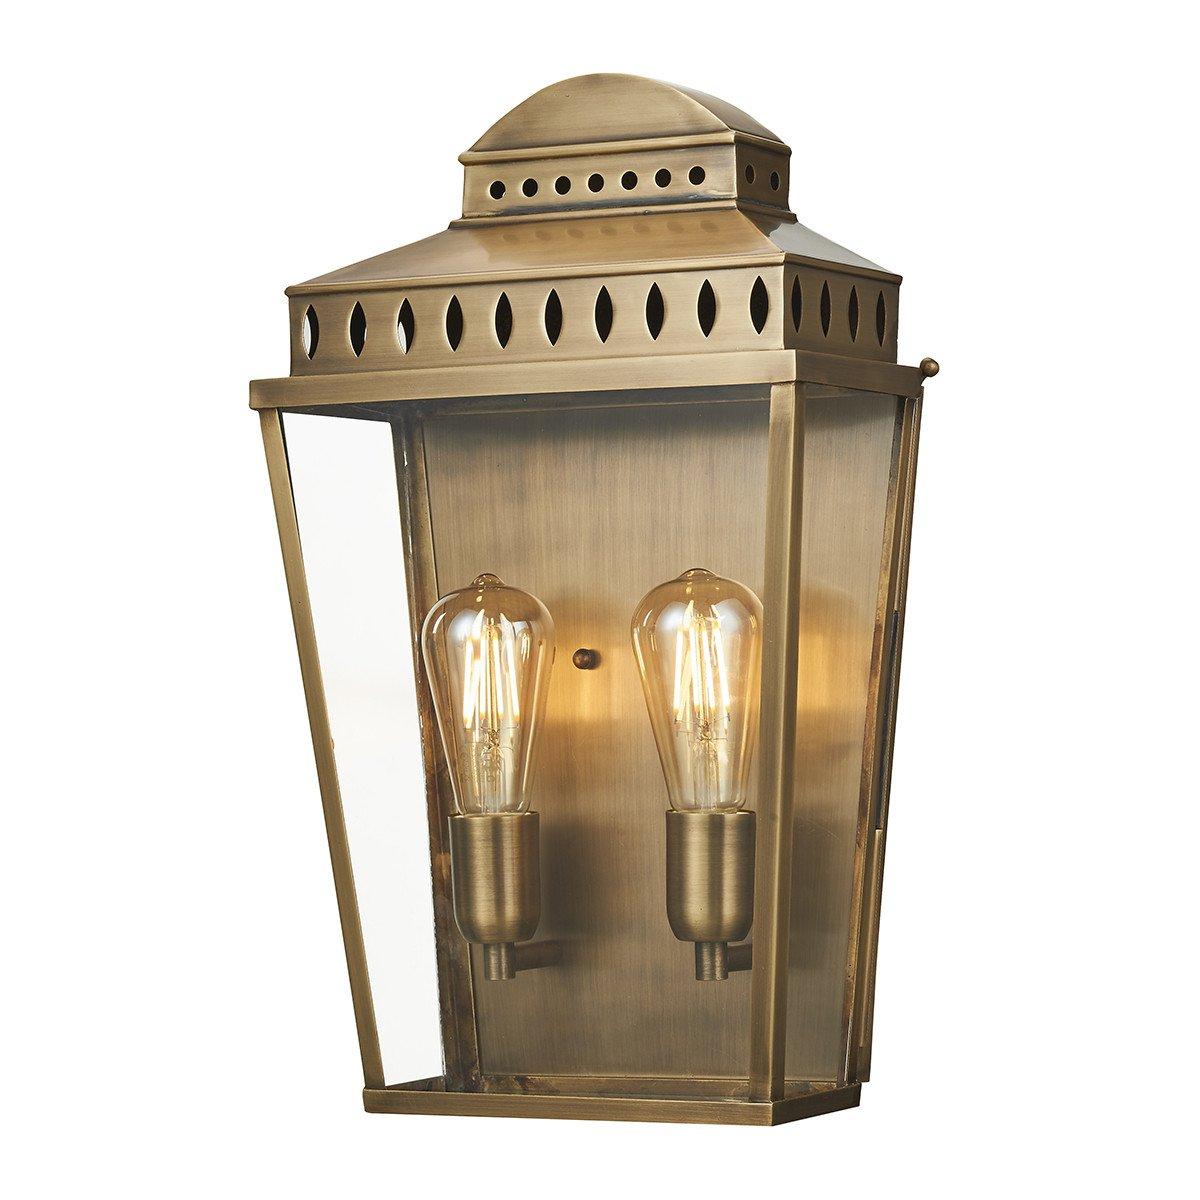 Mansion House 2 Light Large Outdoor Wall Lantern Brass IP44 E27